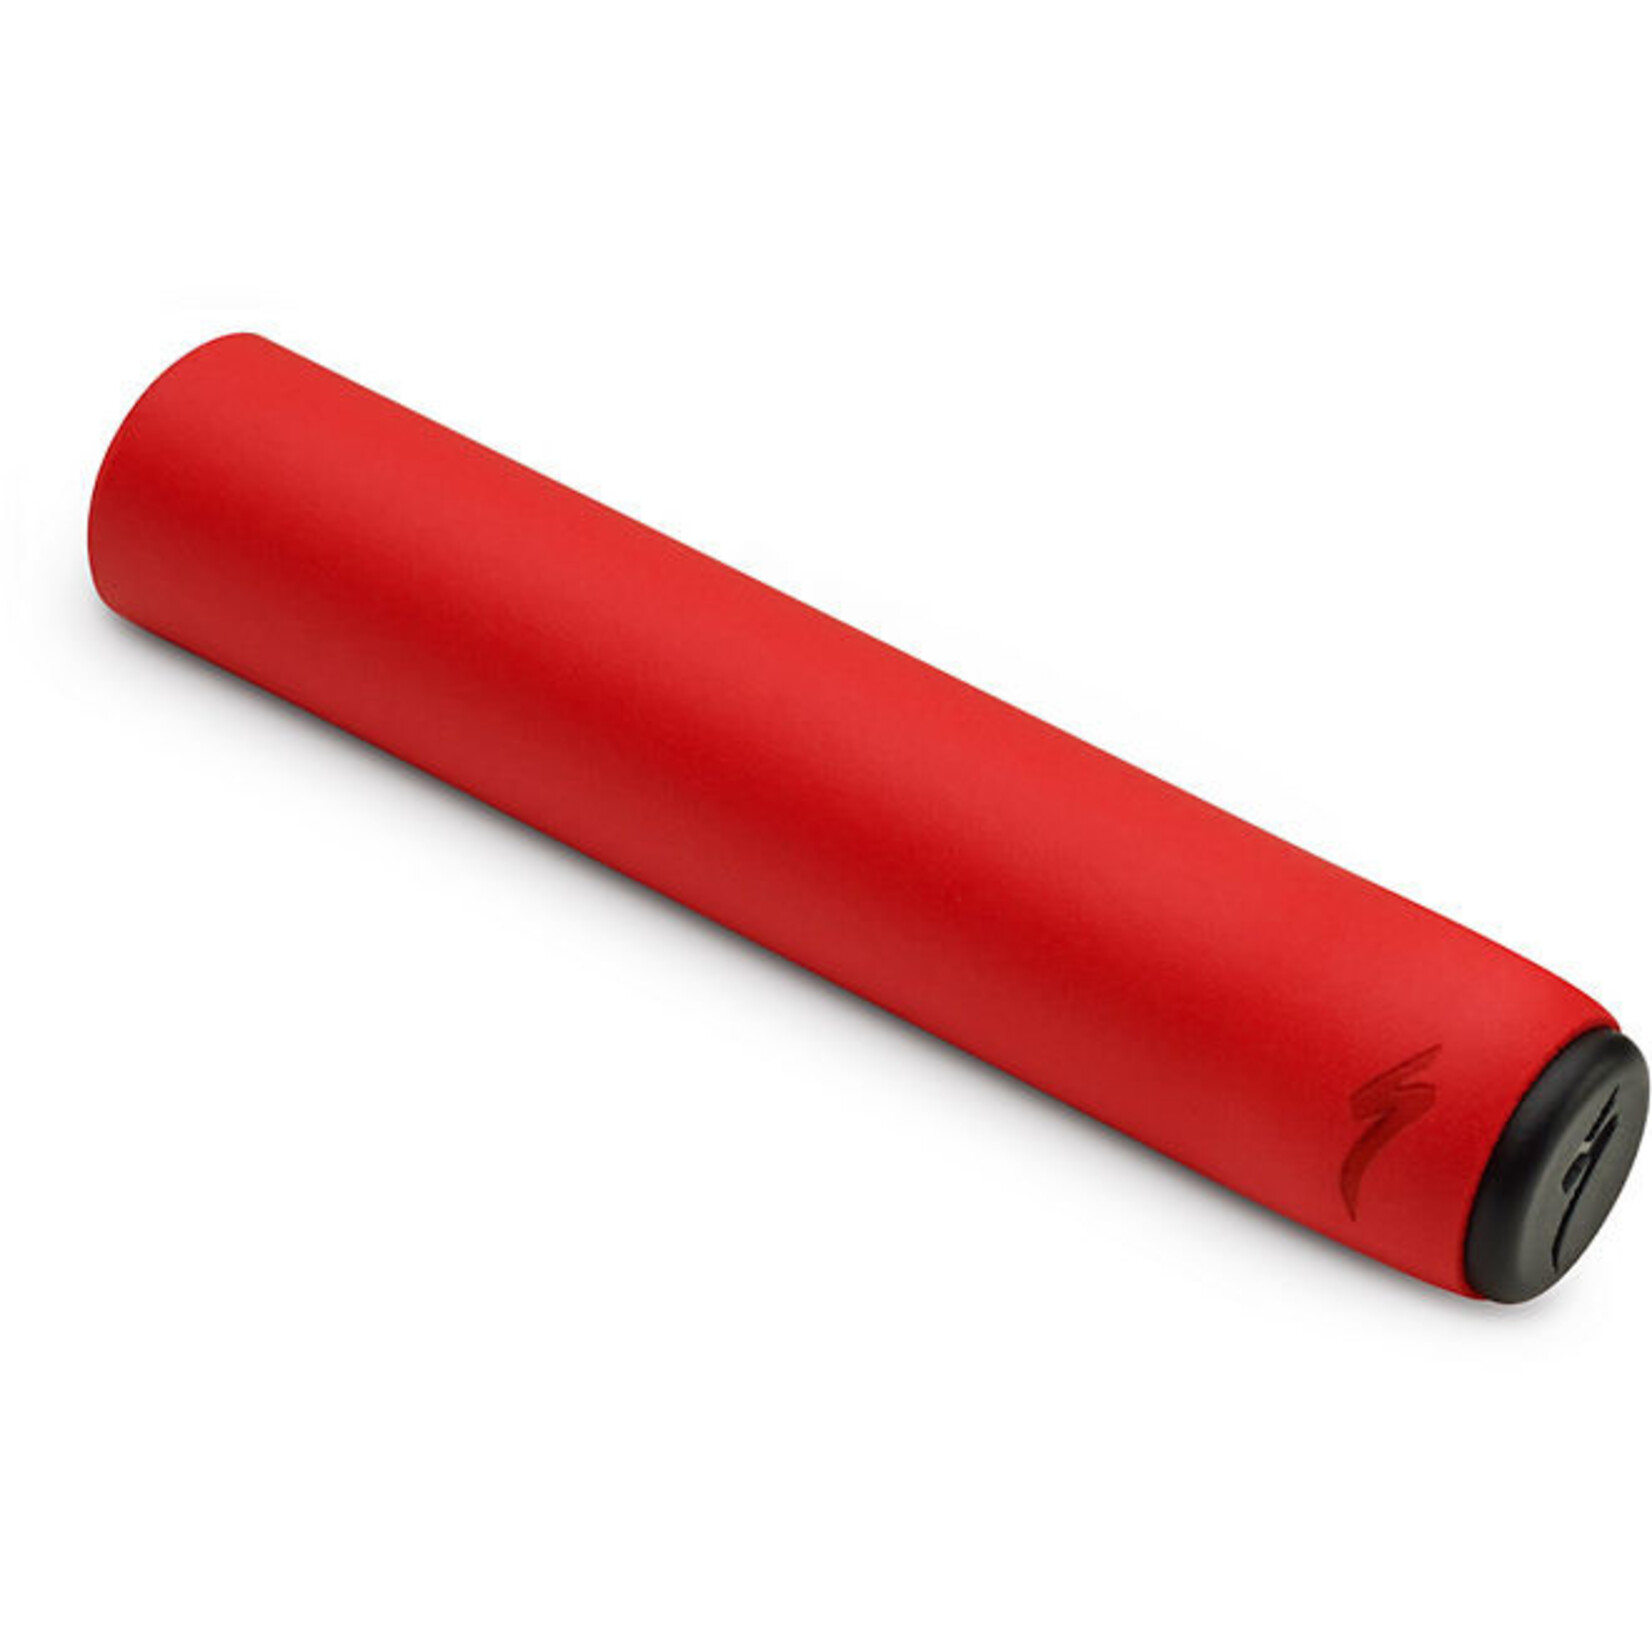 Specialized XC Race Grips in Red